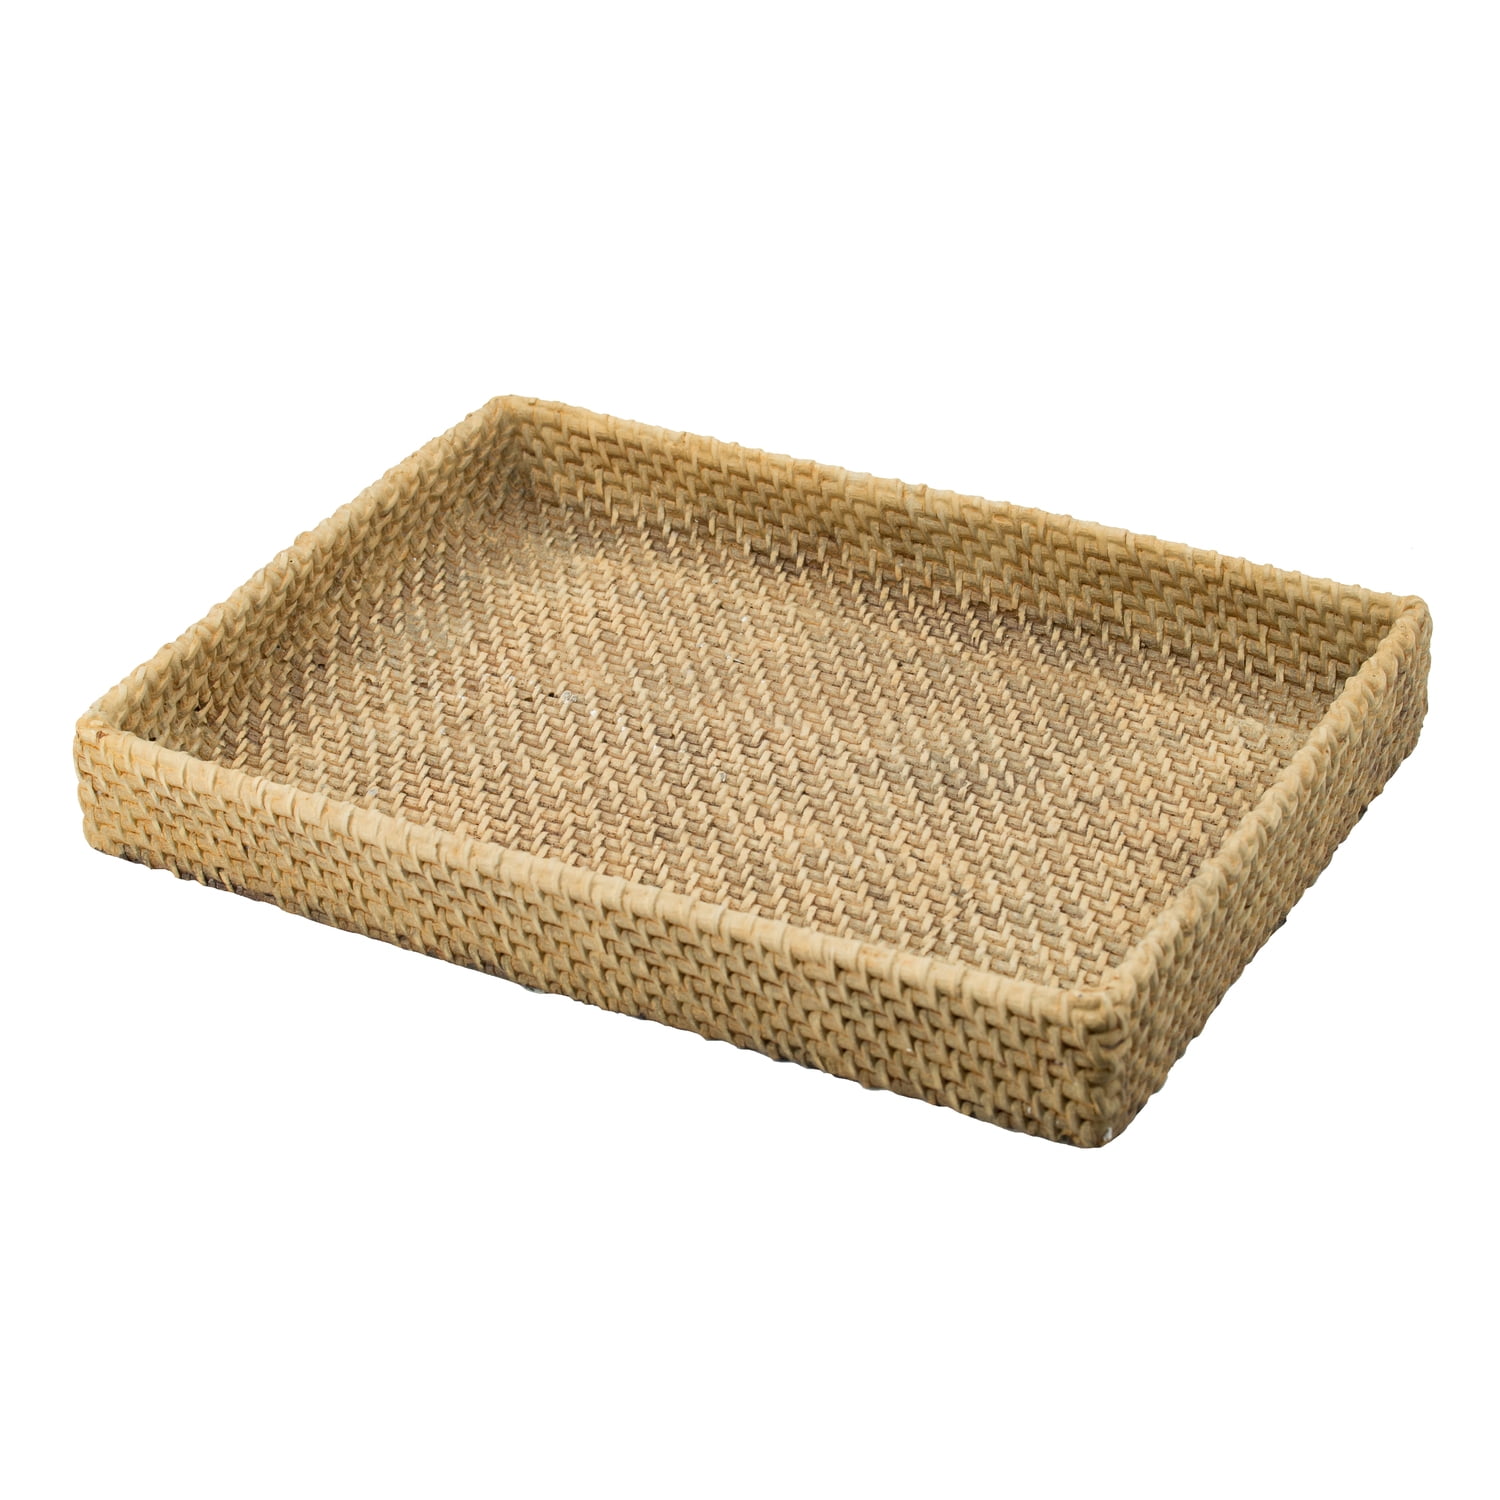 Wood Wicker Rattan Fruit Food Square Serving Tray Large 20 1/8" x 20 1/8" 